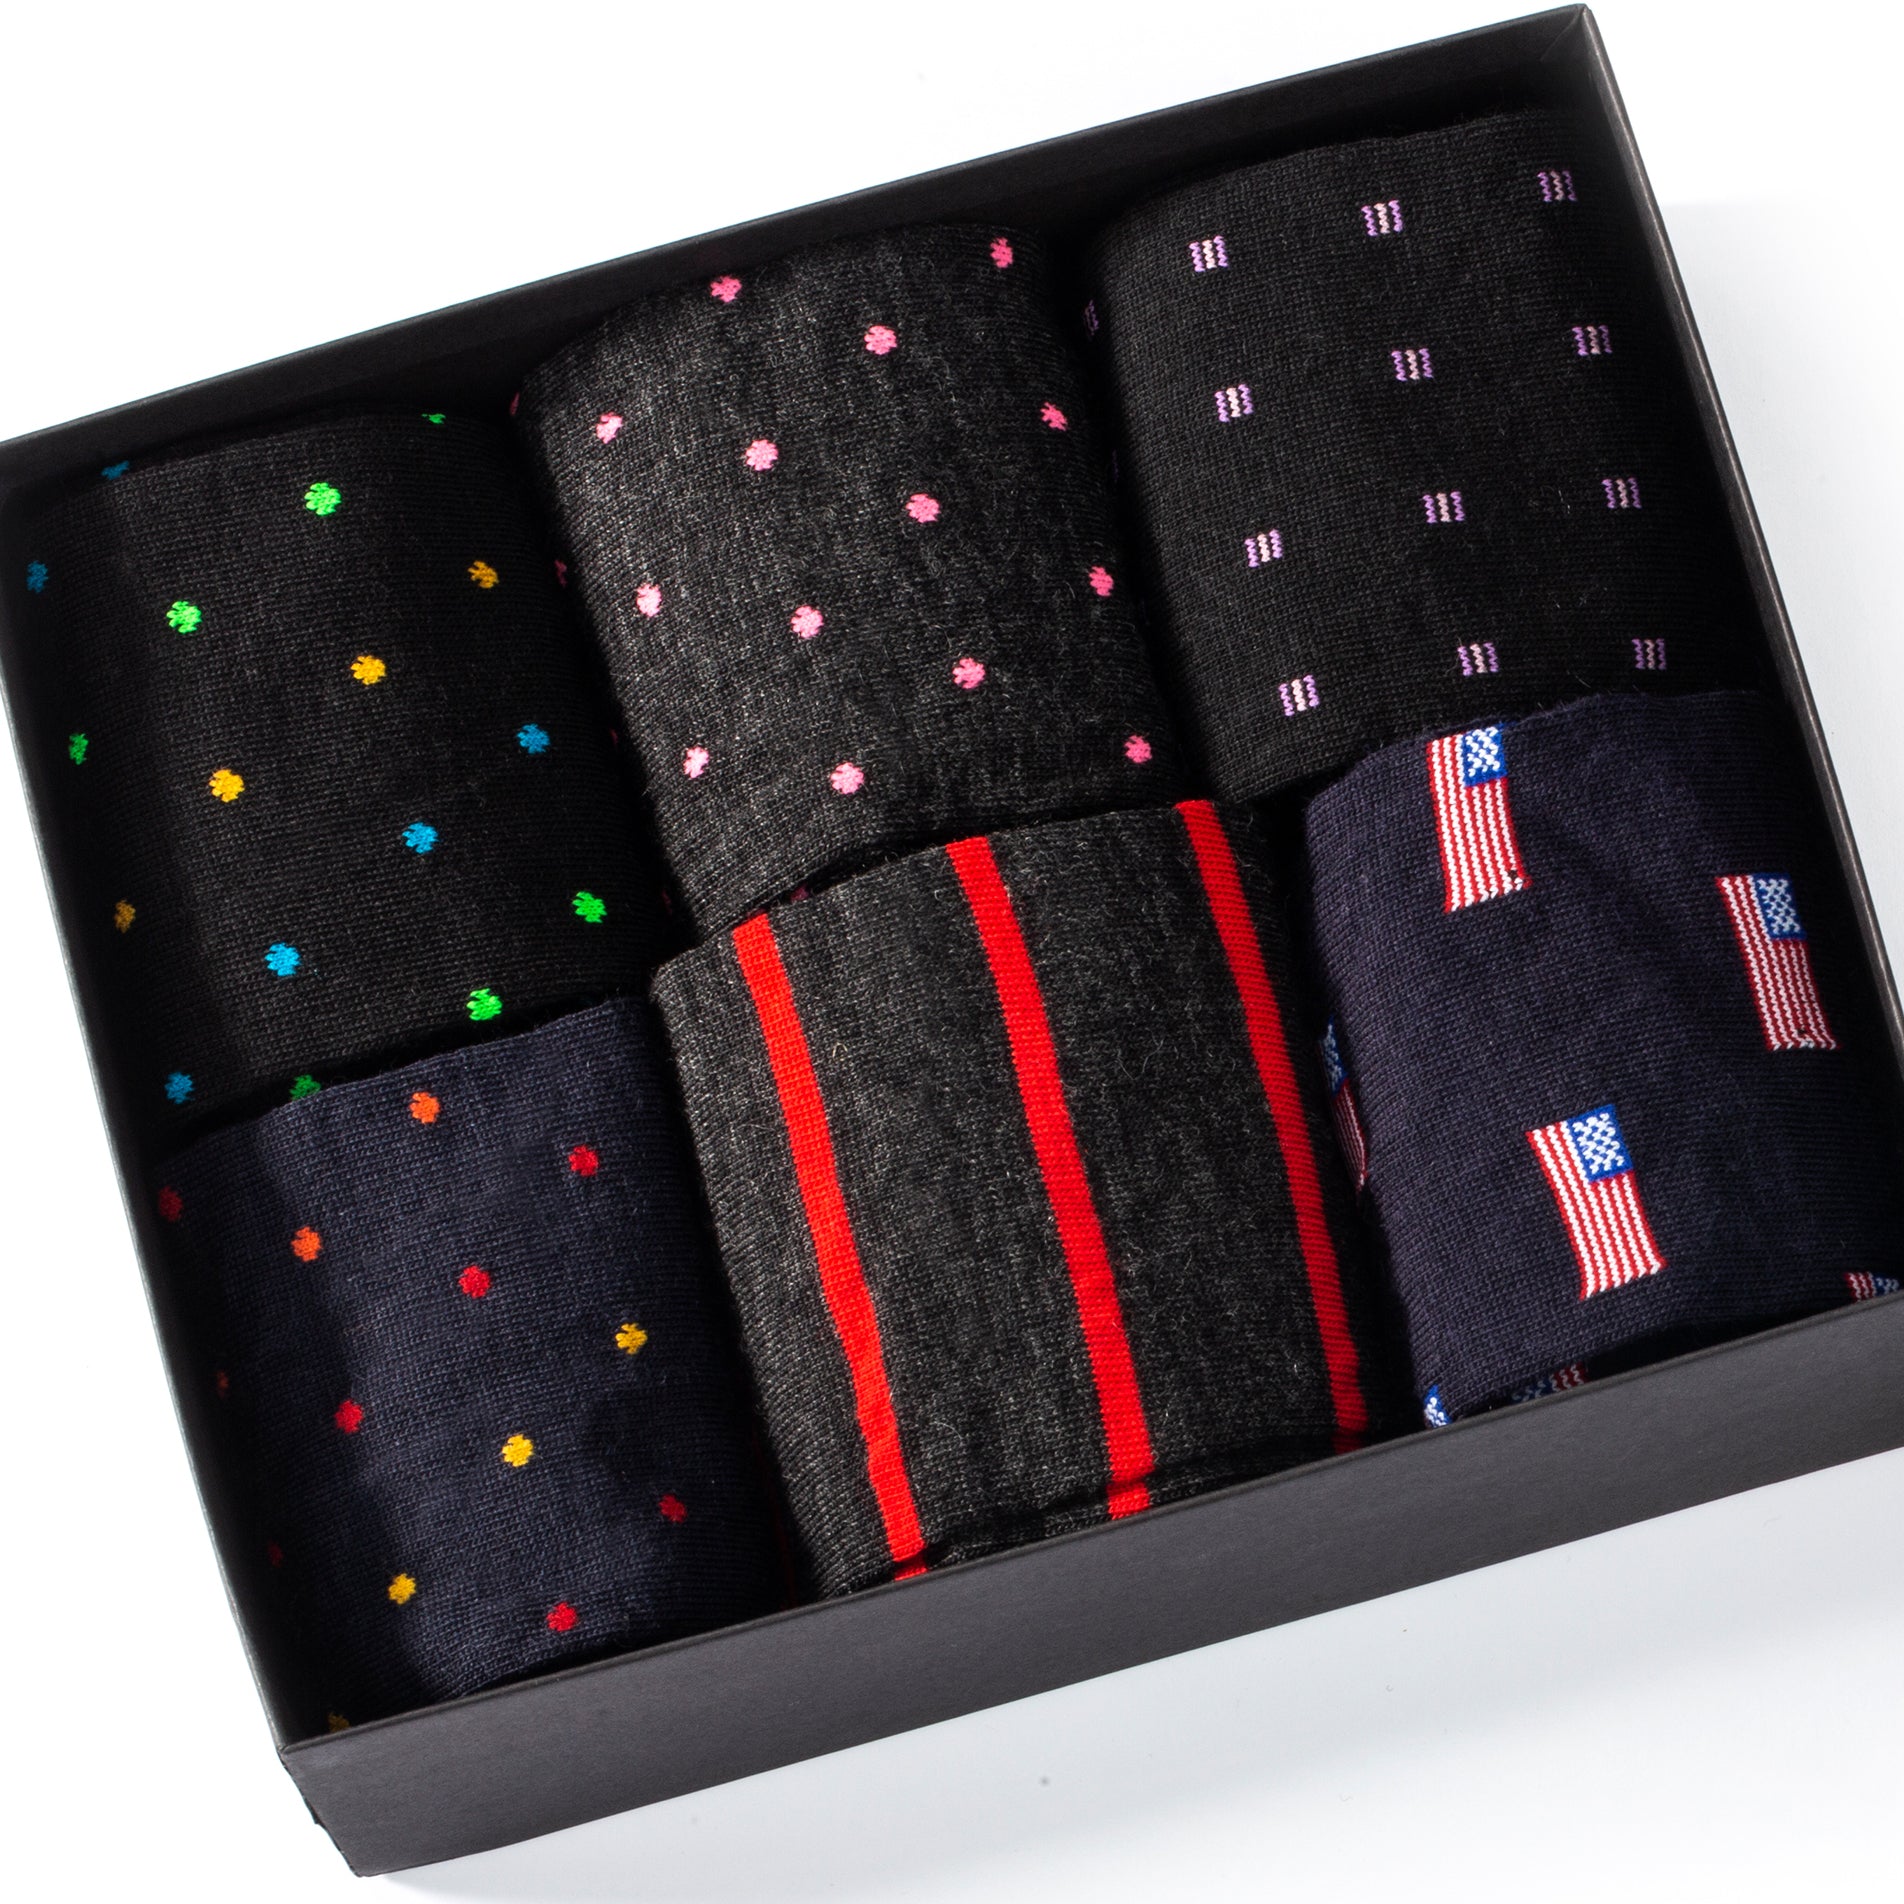 gift box filled with colorful men's dress socks from Boardroom Socks